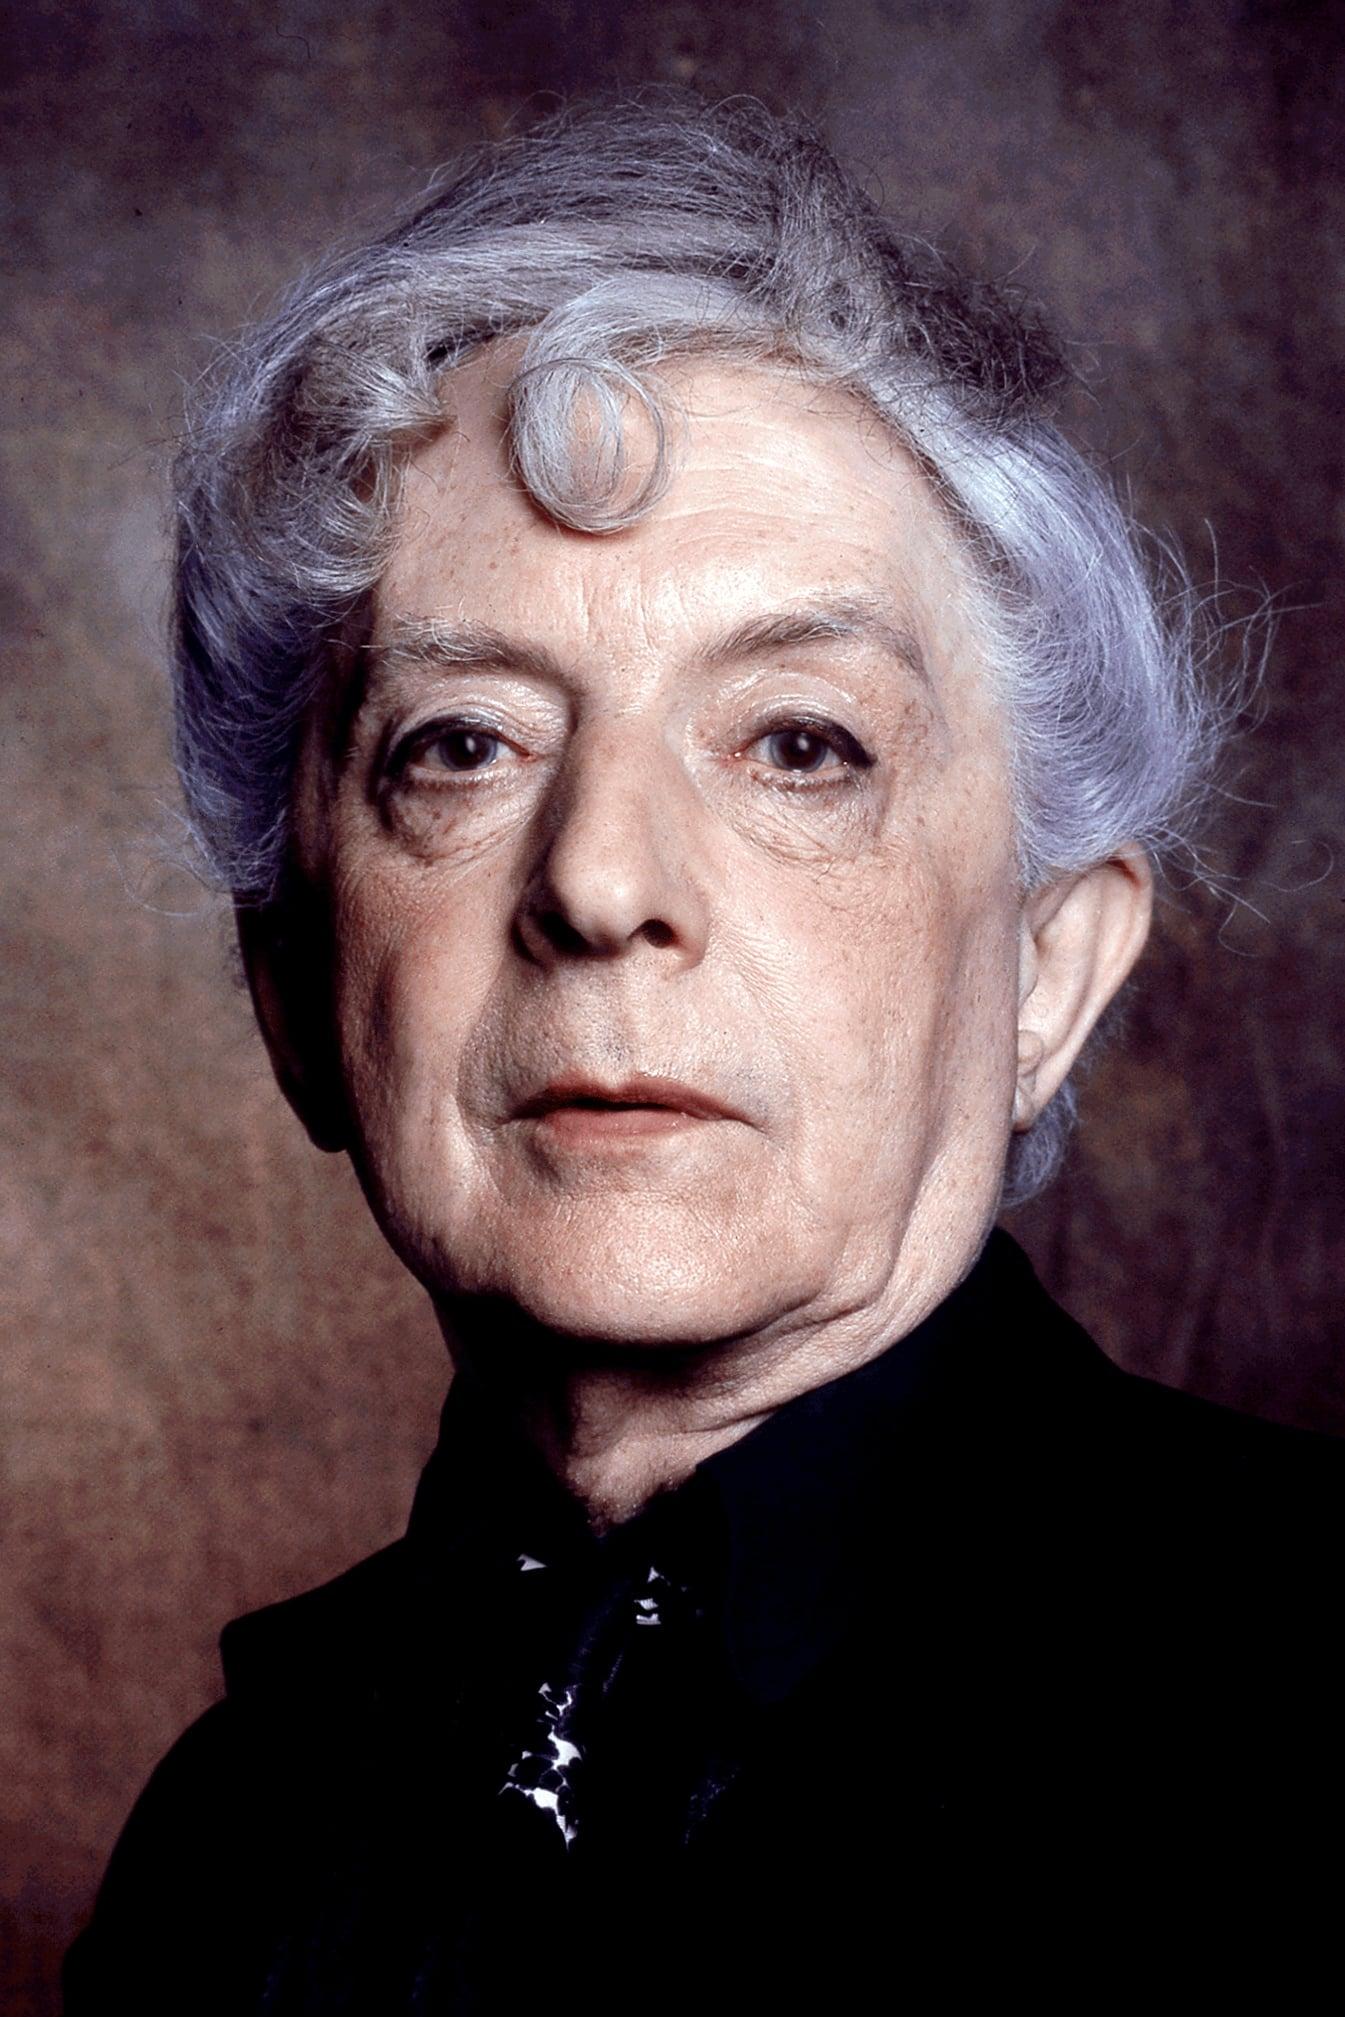 Quentin Crisp | Guest at Party (uncredited)